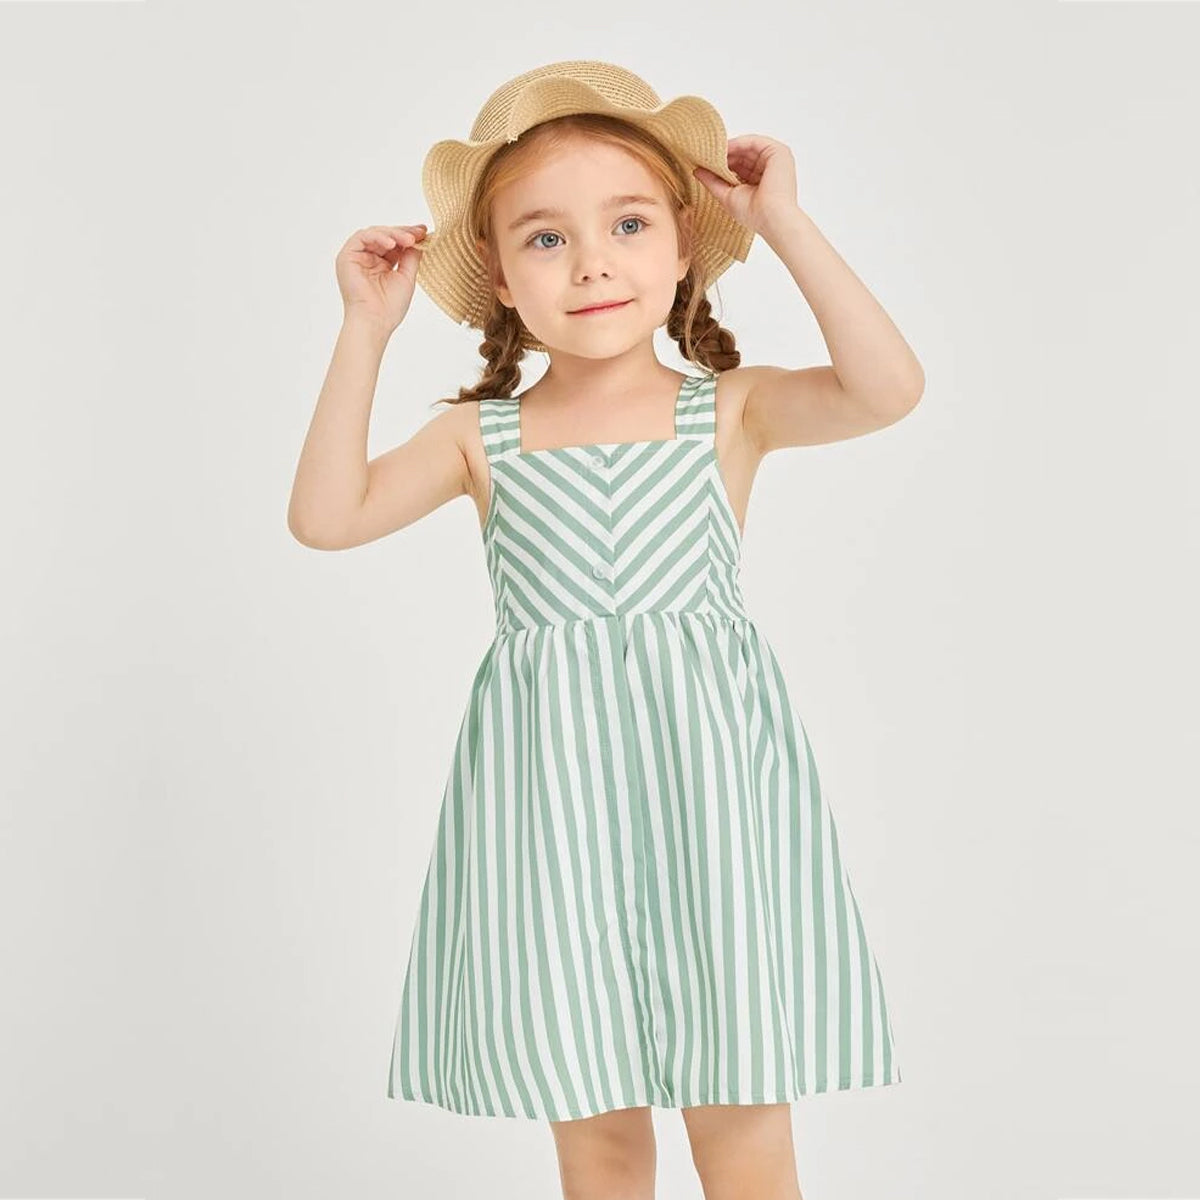 BabyGirl's Cotton Green Striped Cami Frocks & Dresses for Kids.